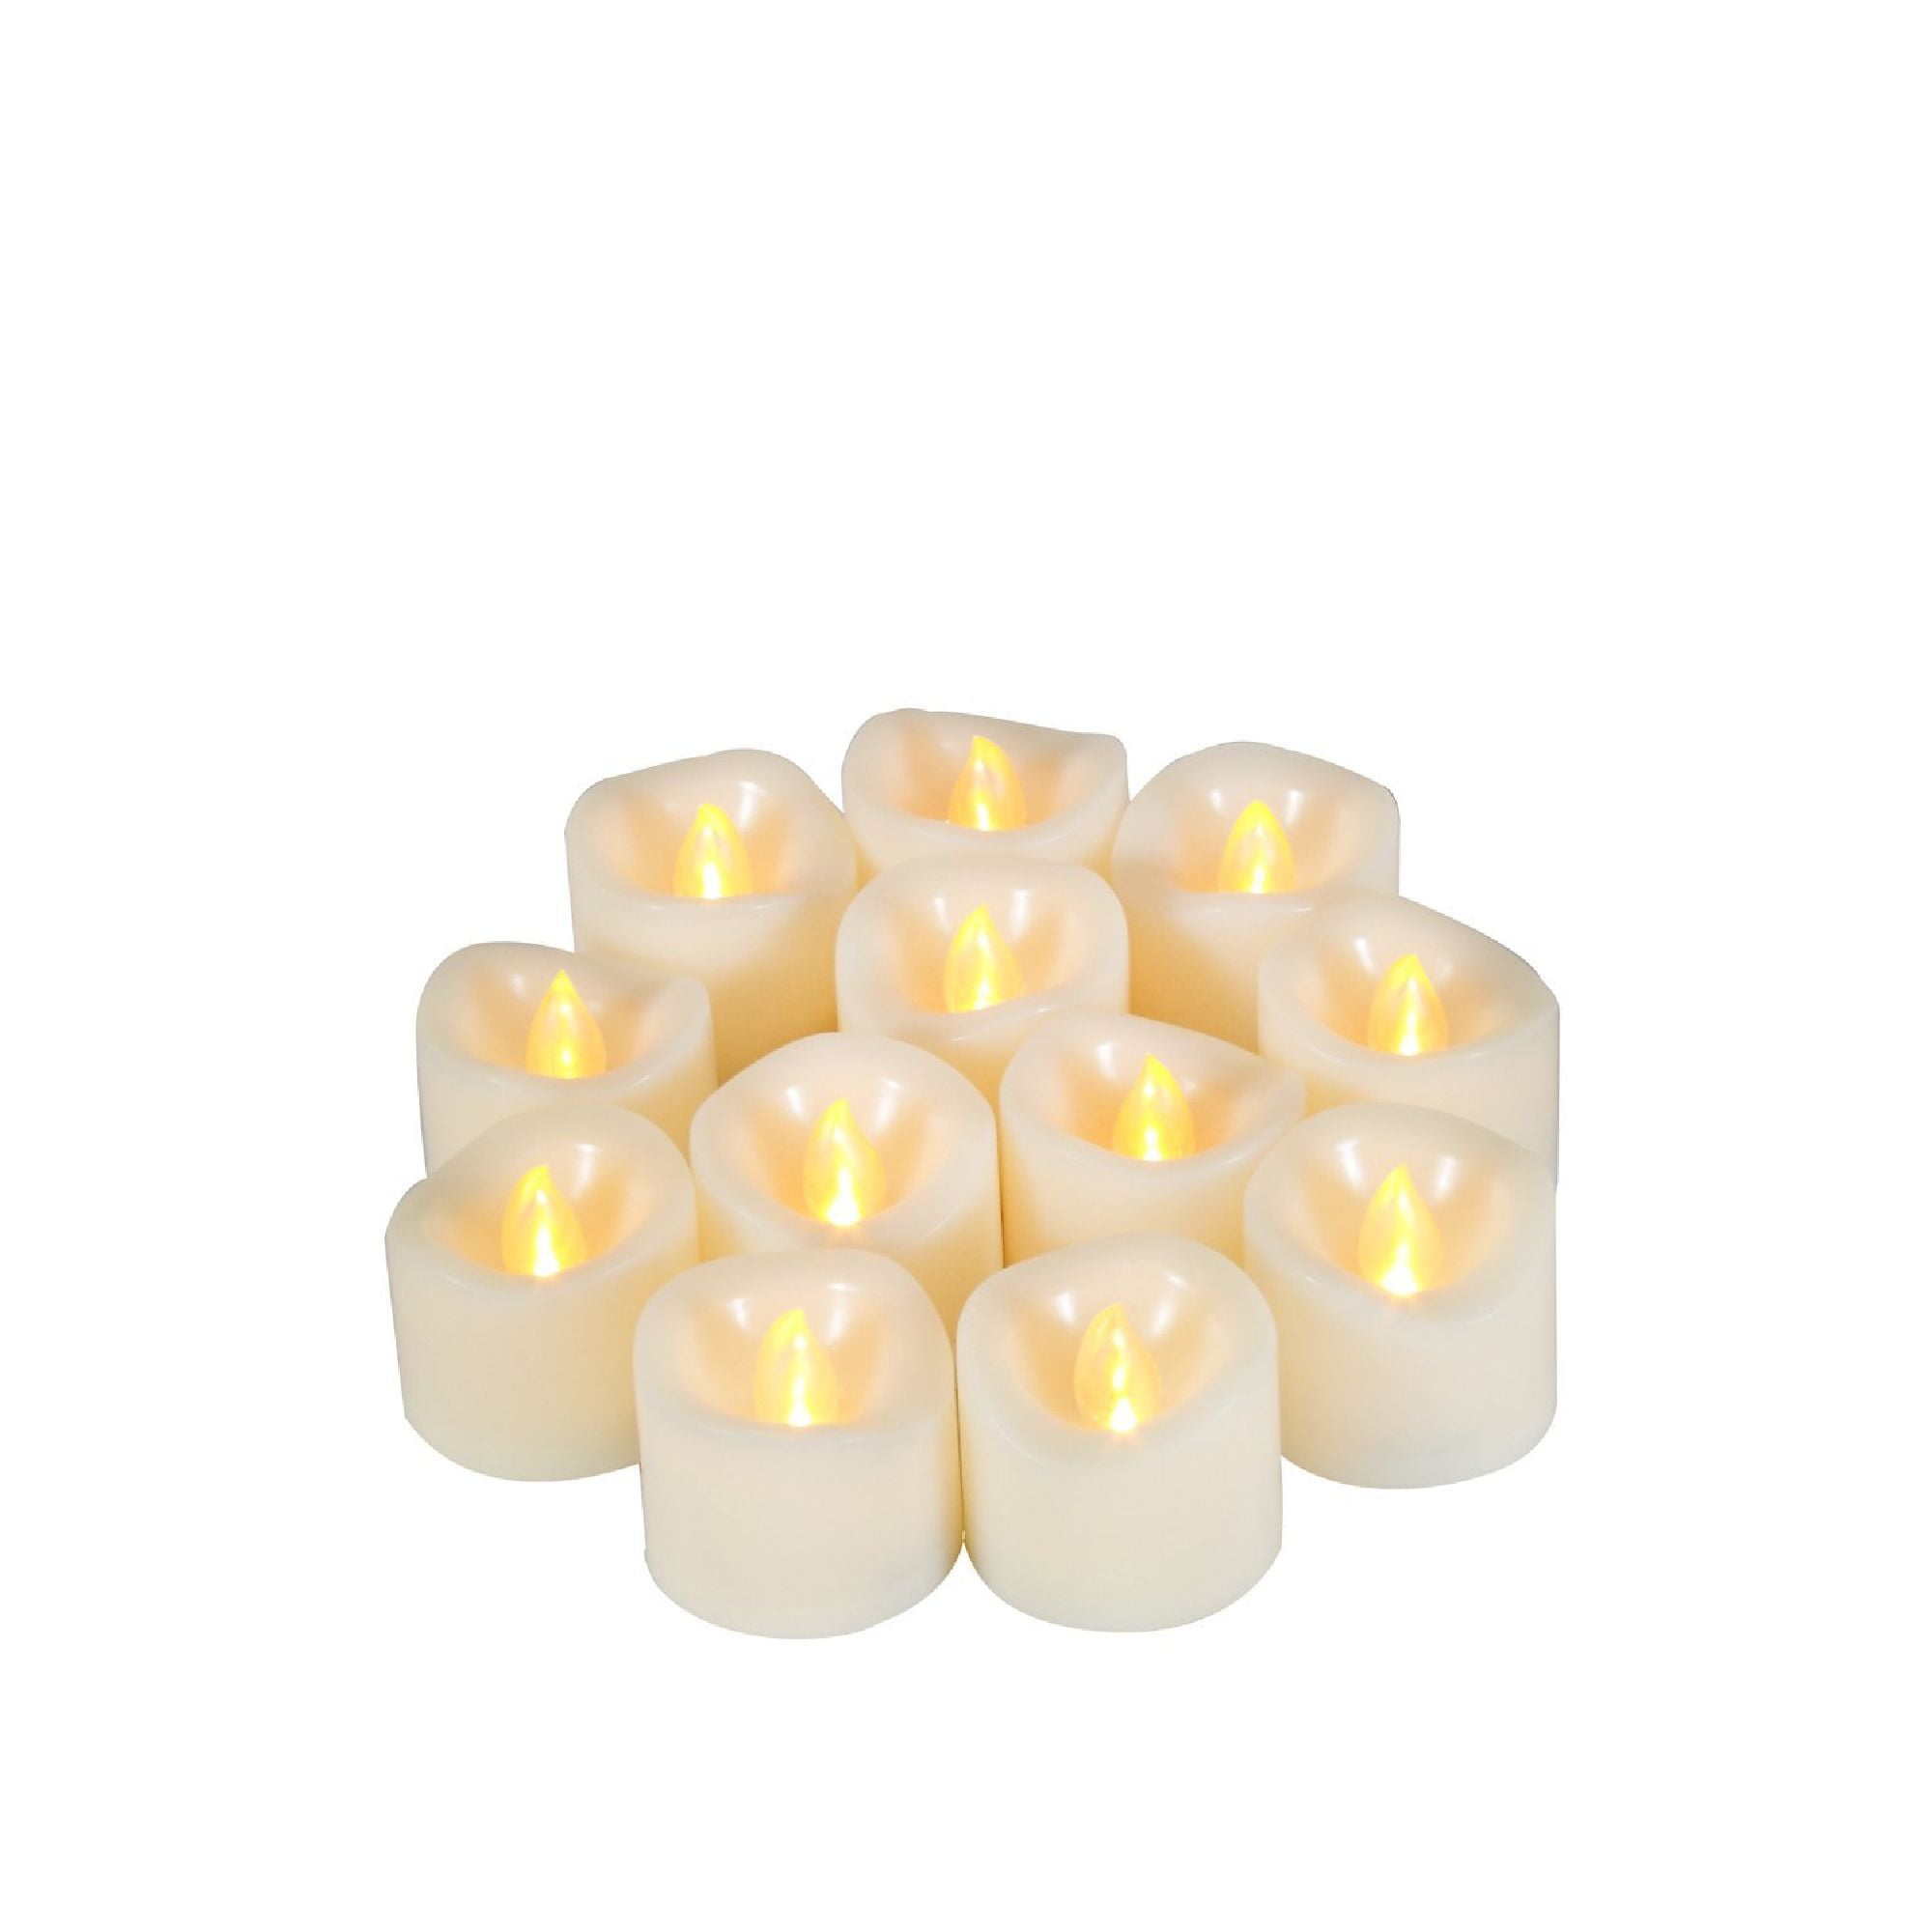 Warm White Battery Operated Flameless LED Candles Taper Pillar Tealight Votive 